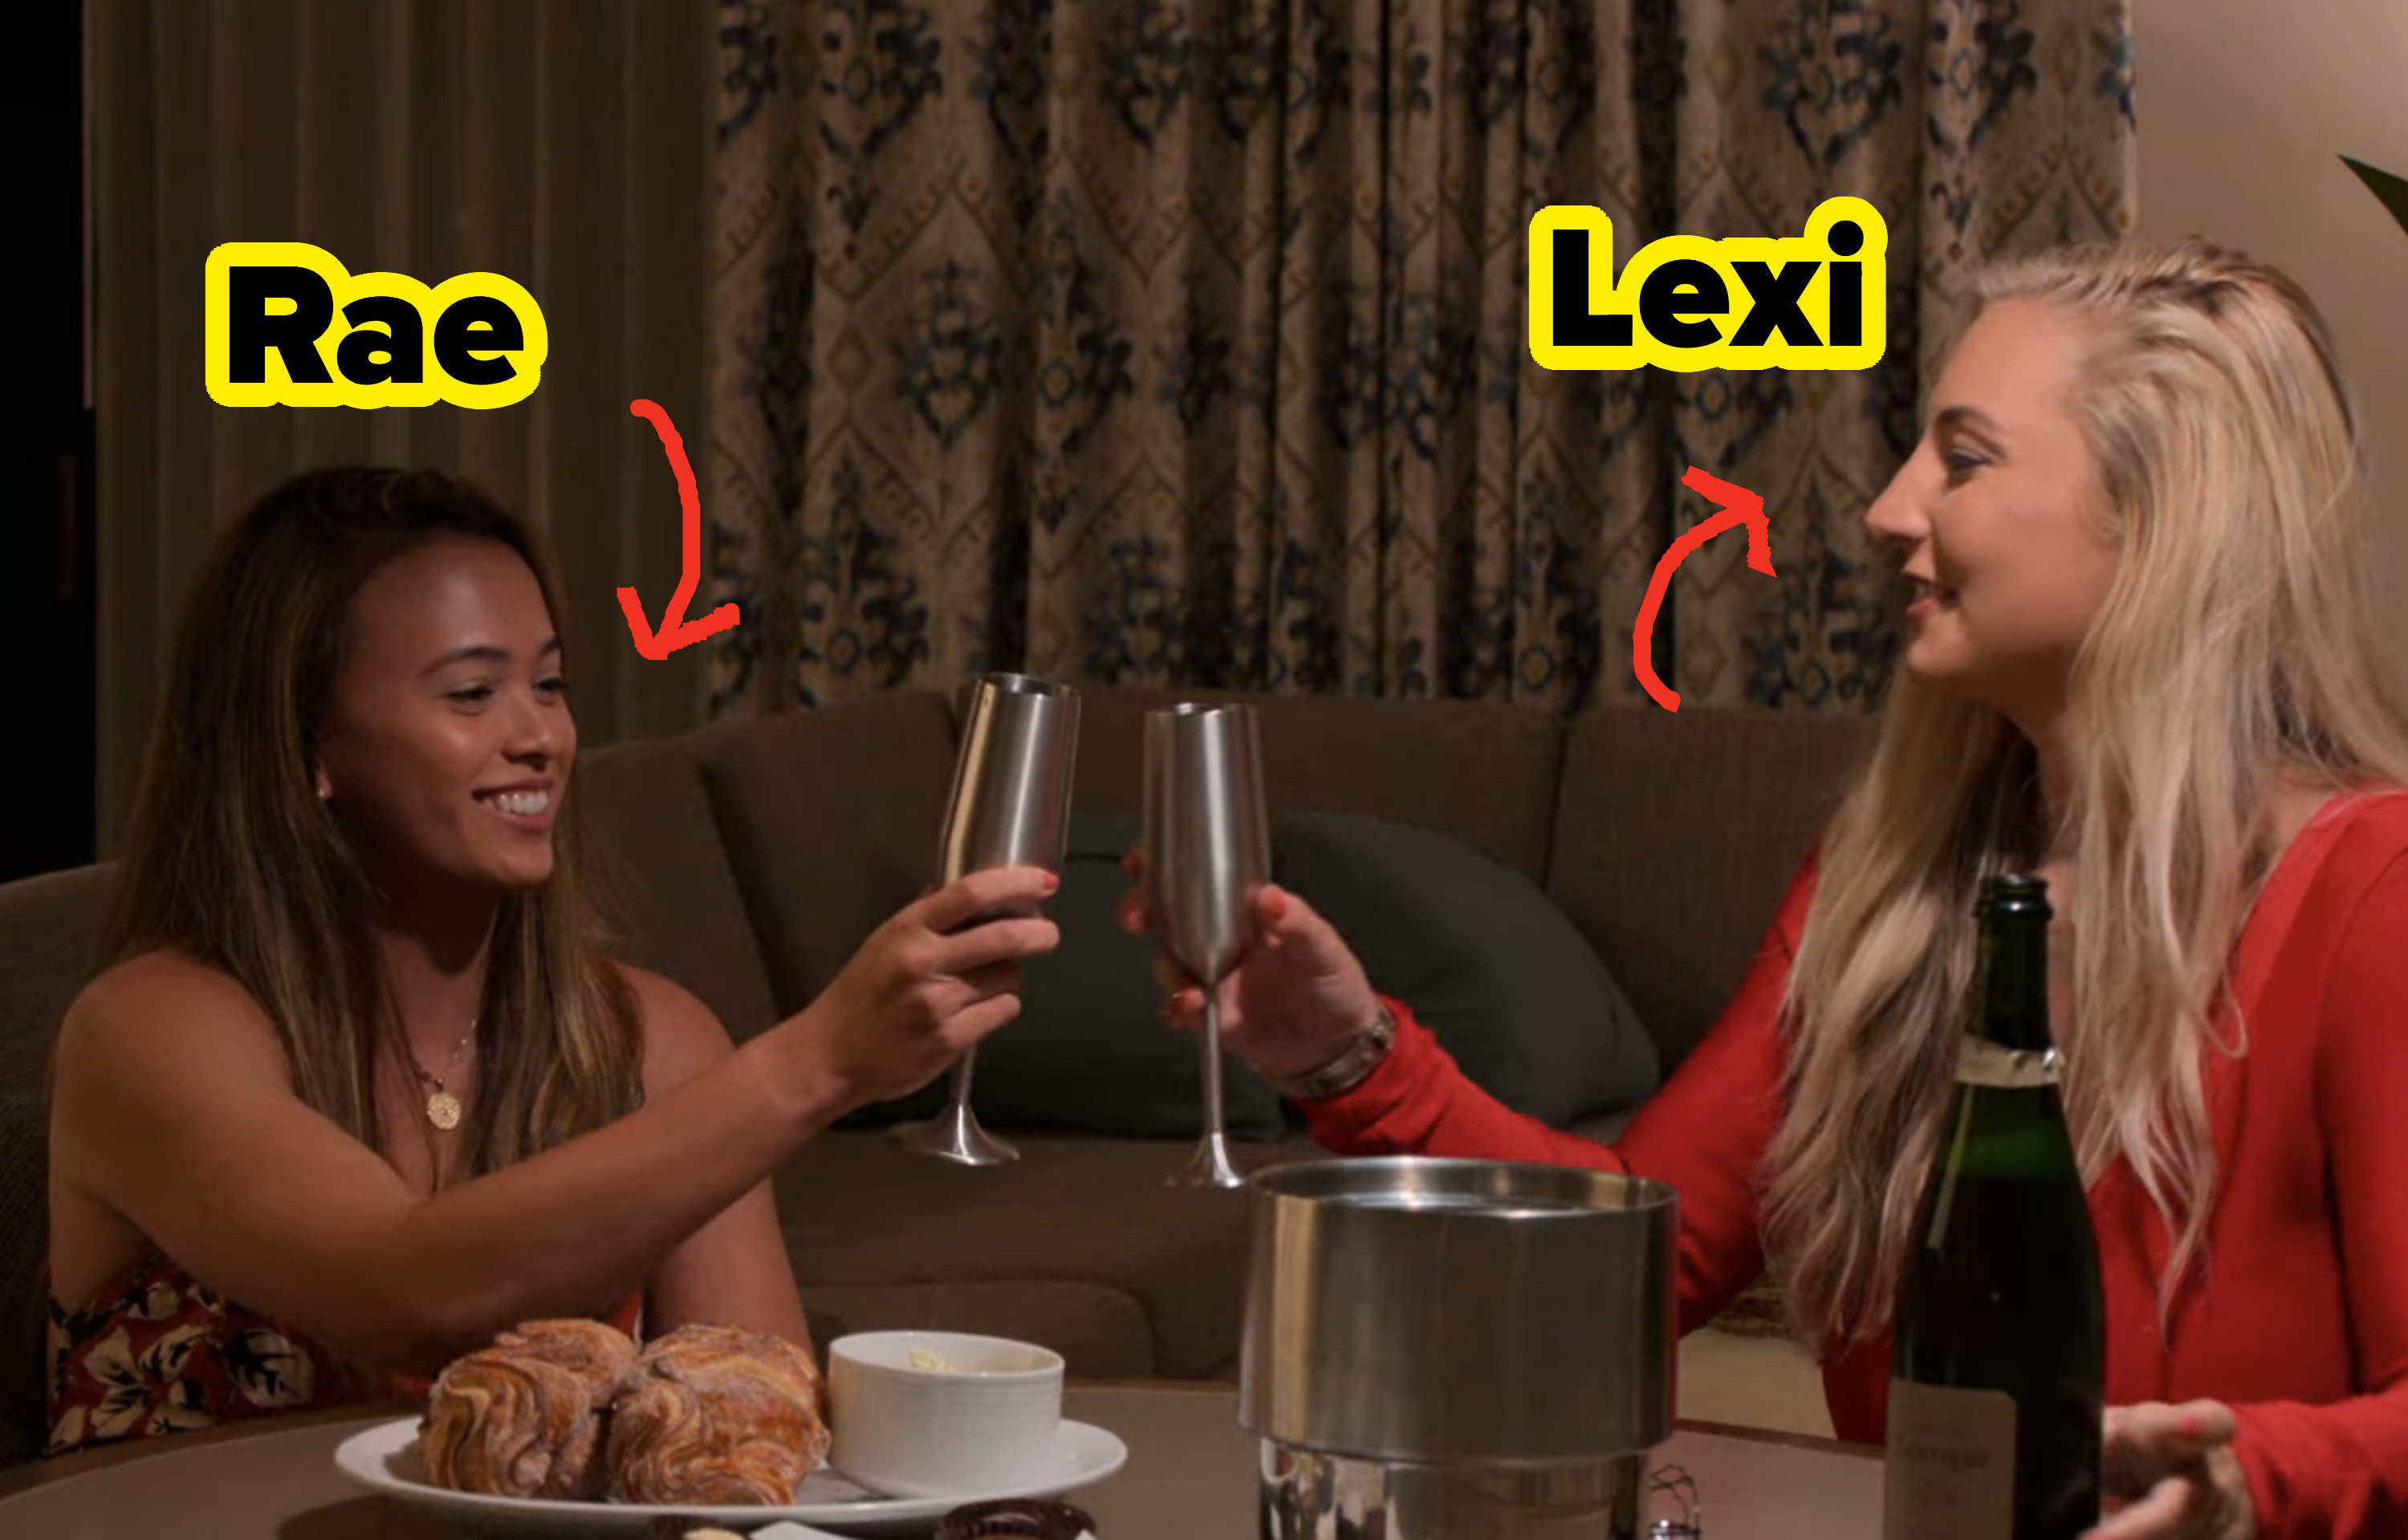 Rae and Lexi do a cheers before they go into separate trial marriages with other people